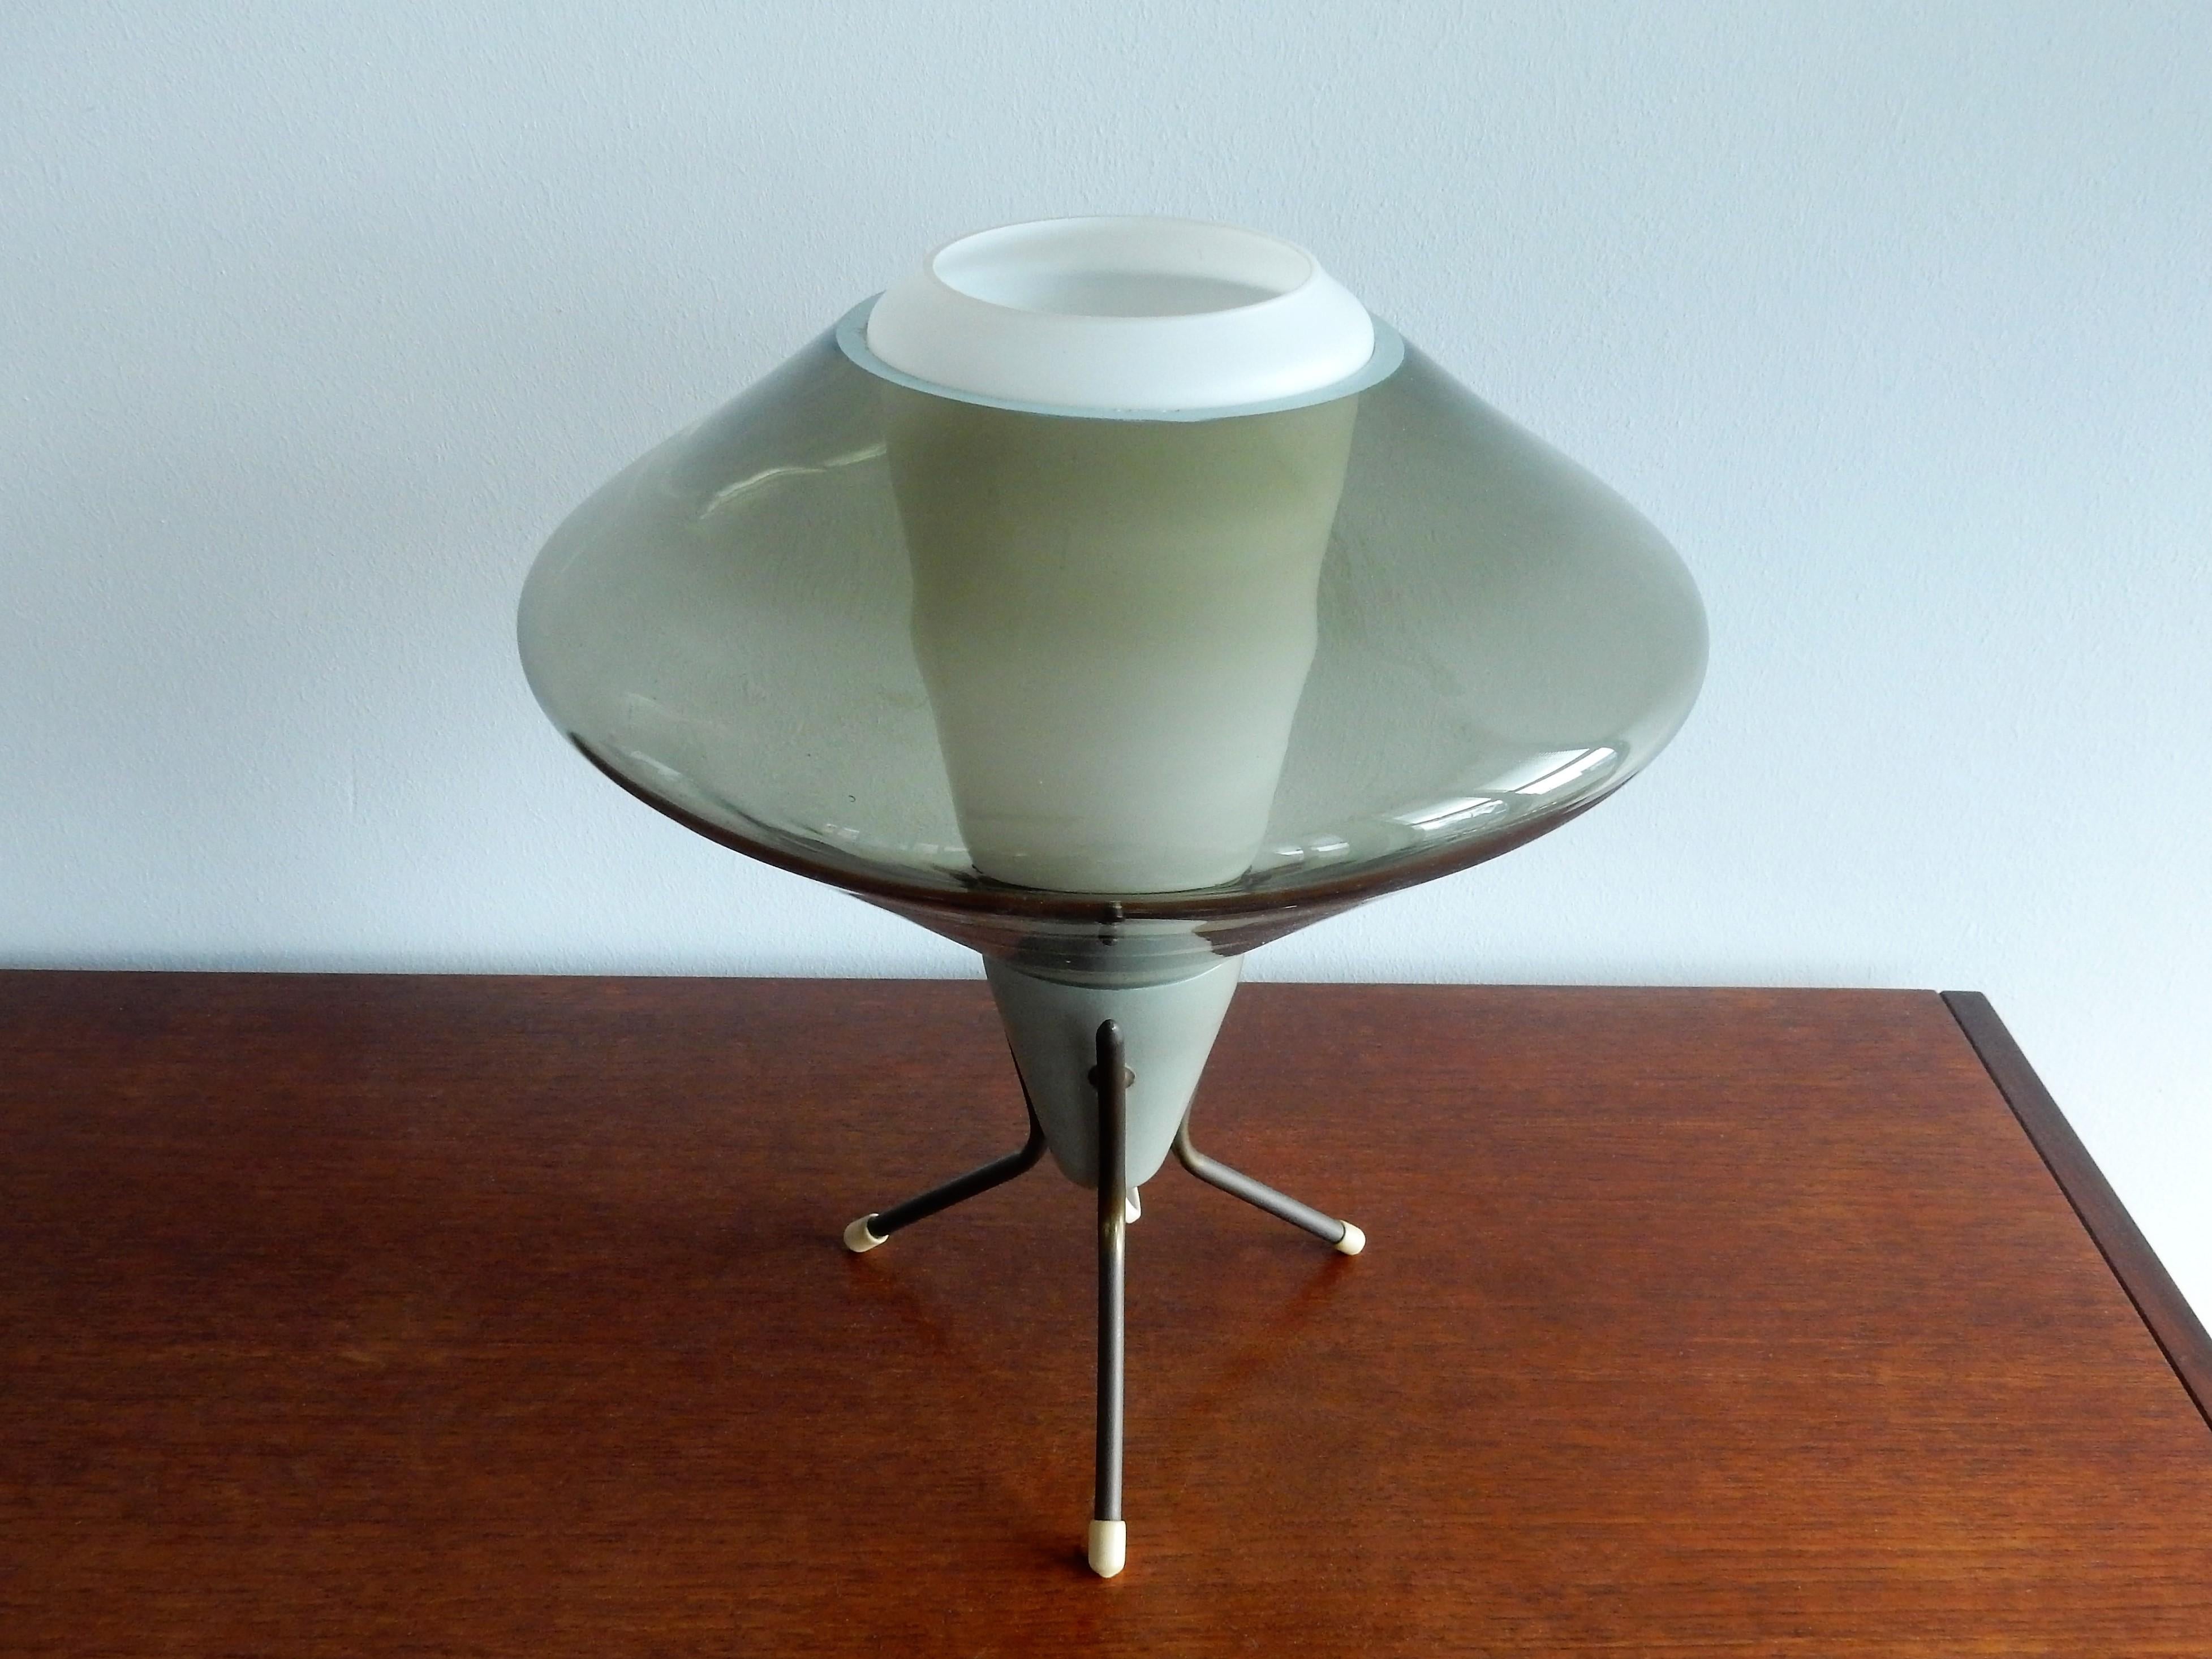 This is a nice tripod table lamp made of metal, opaline and green smoked glass. It has a futuristic Space Age shape and gives a very atmospheric and warm light. It is in a very good condition with some signs of age and use, as pictured. This design